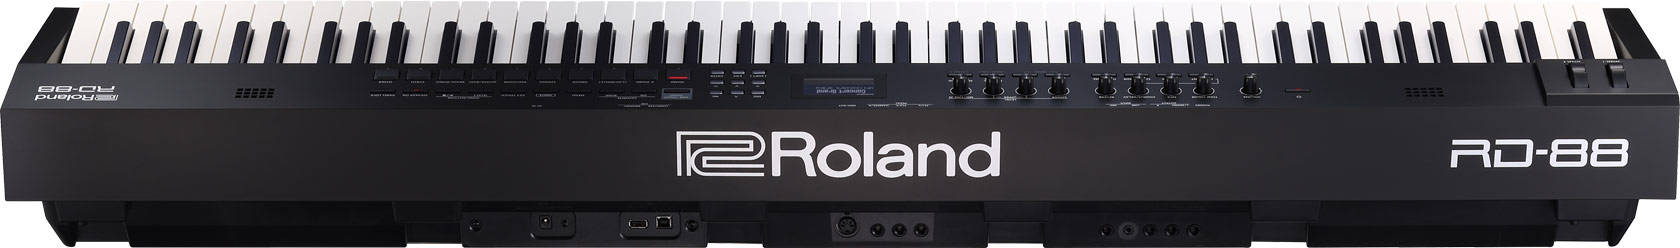 RD-88 Roland Stagepiano